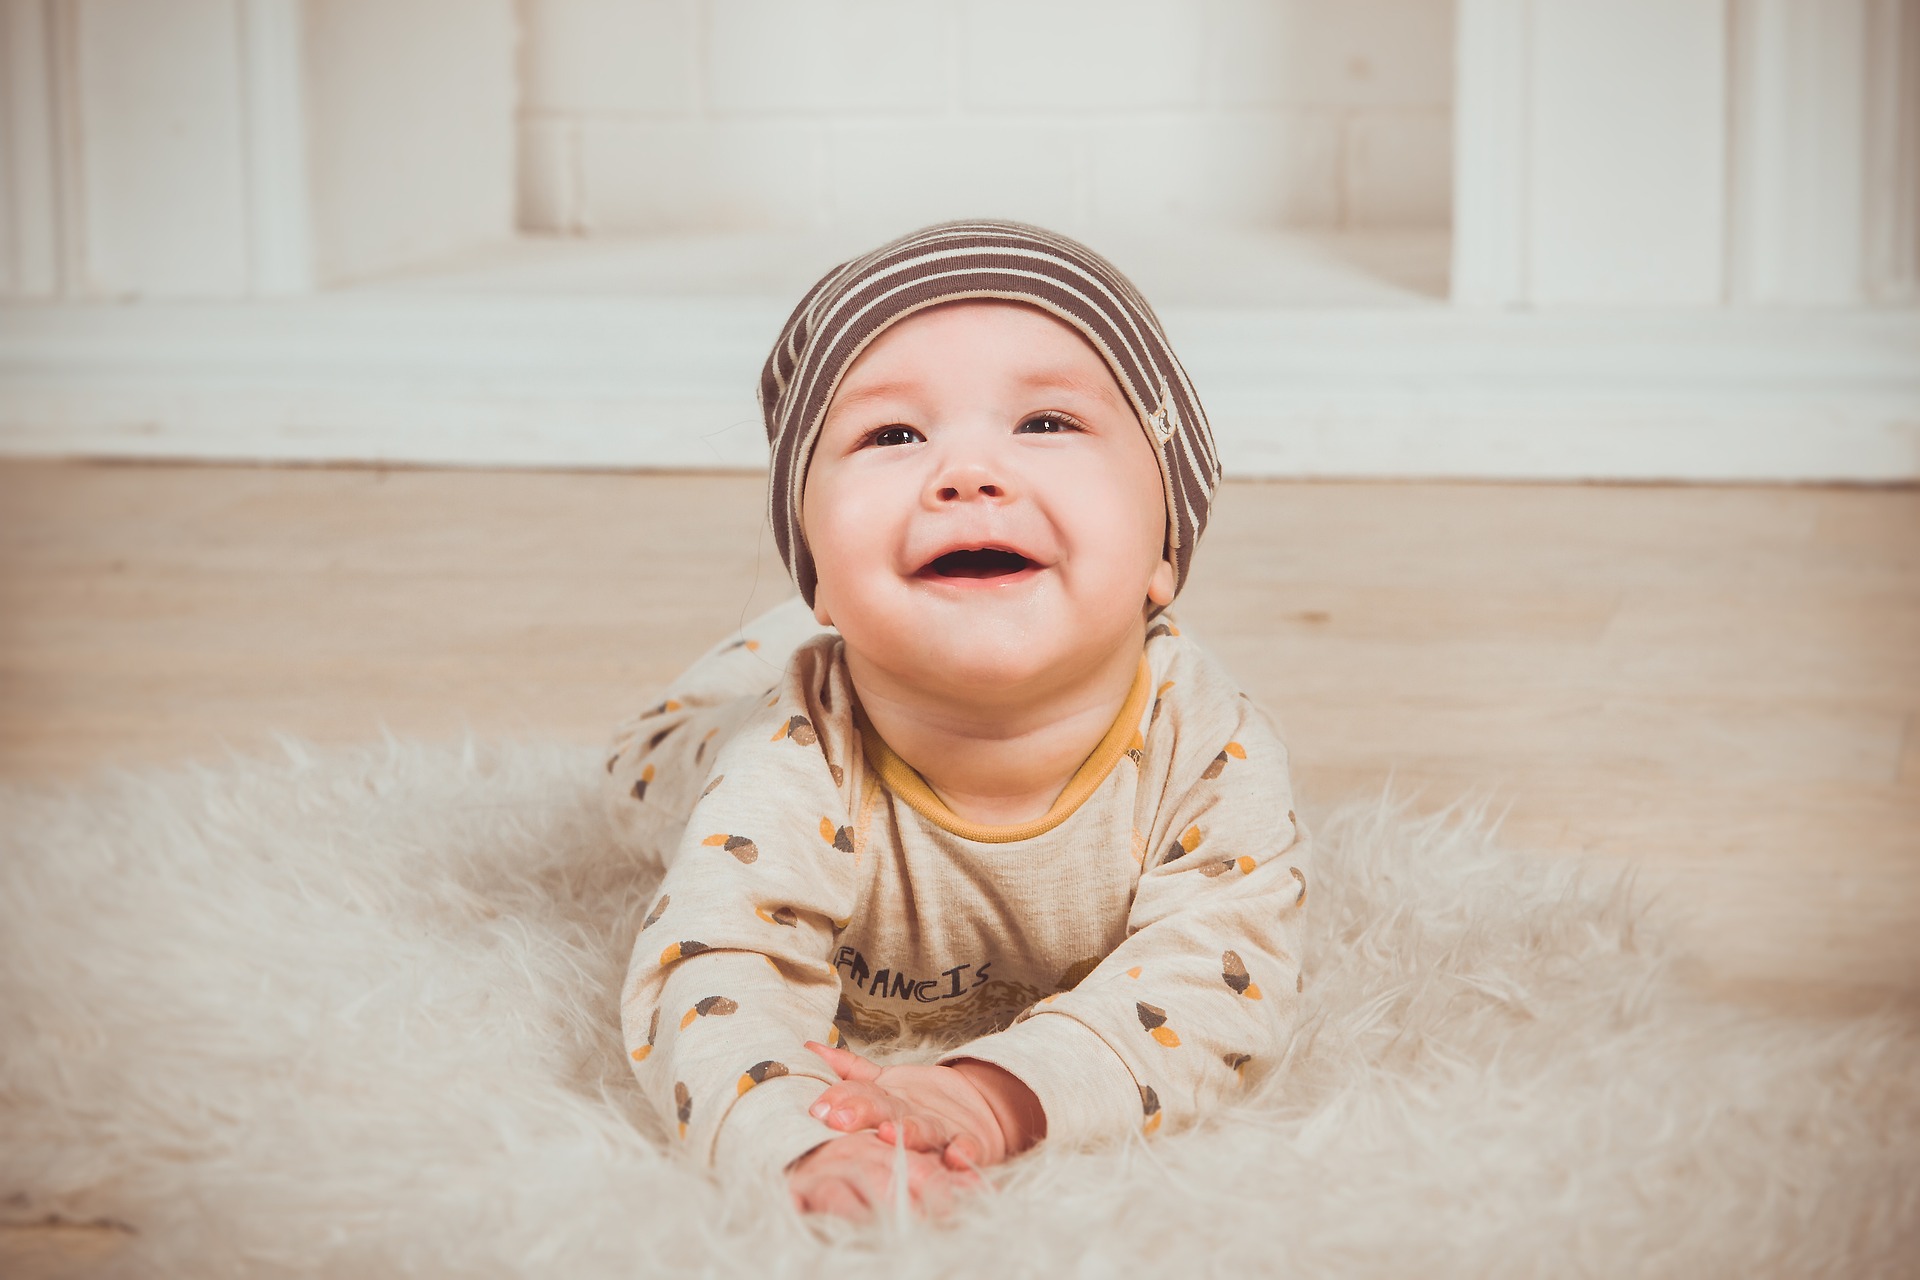  Cute Baby Smile Captions for Instagram